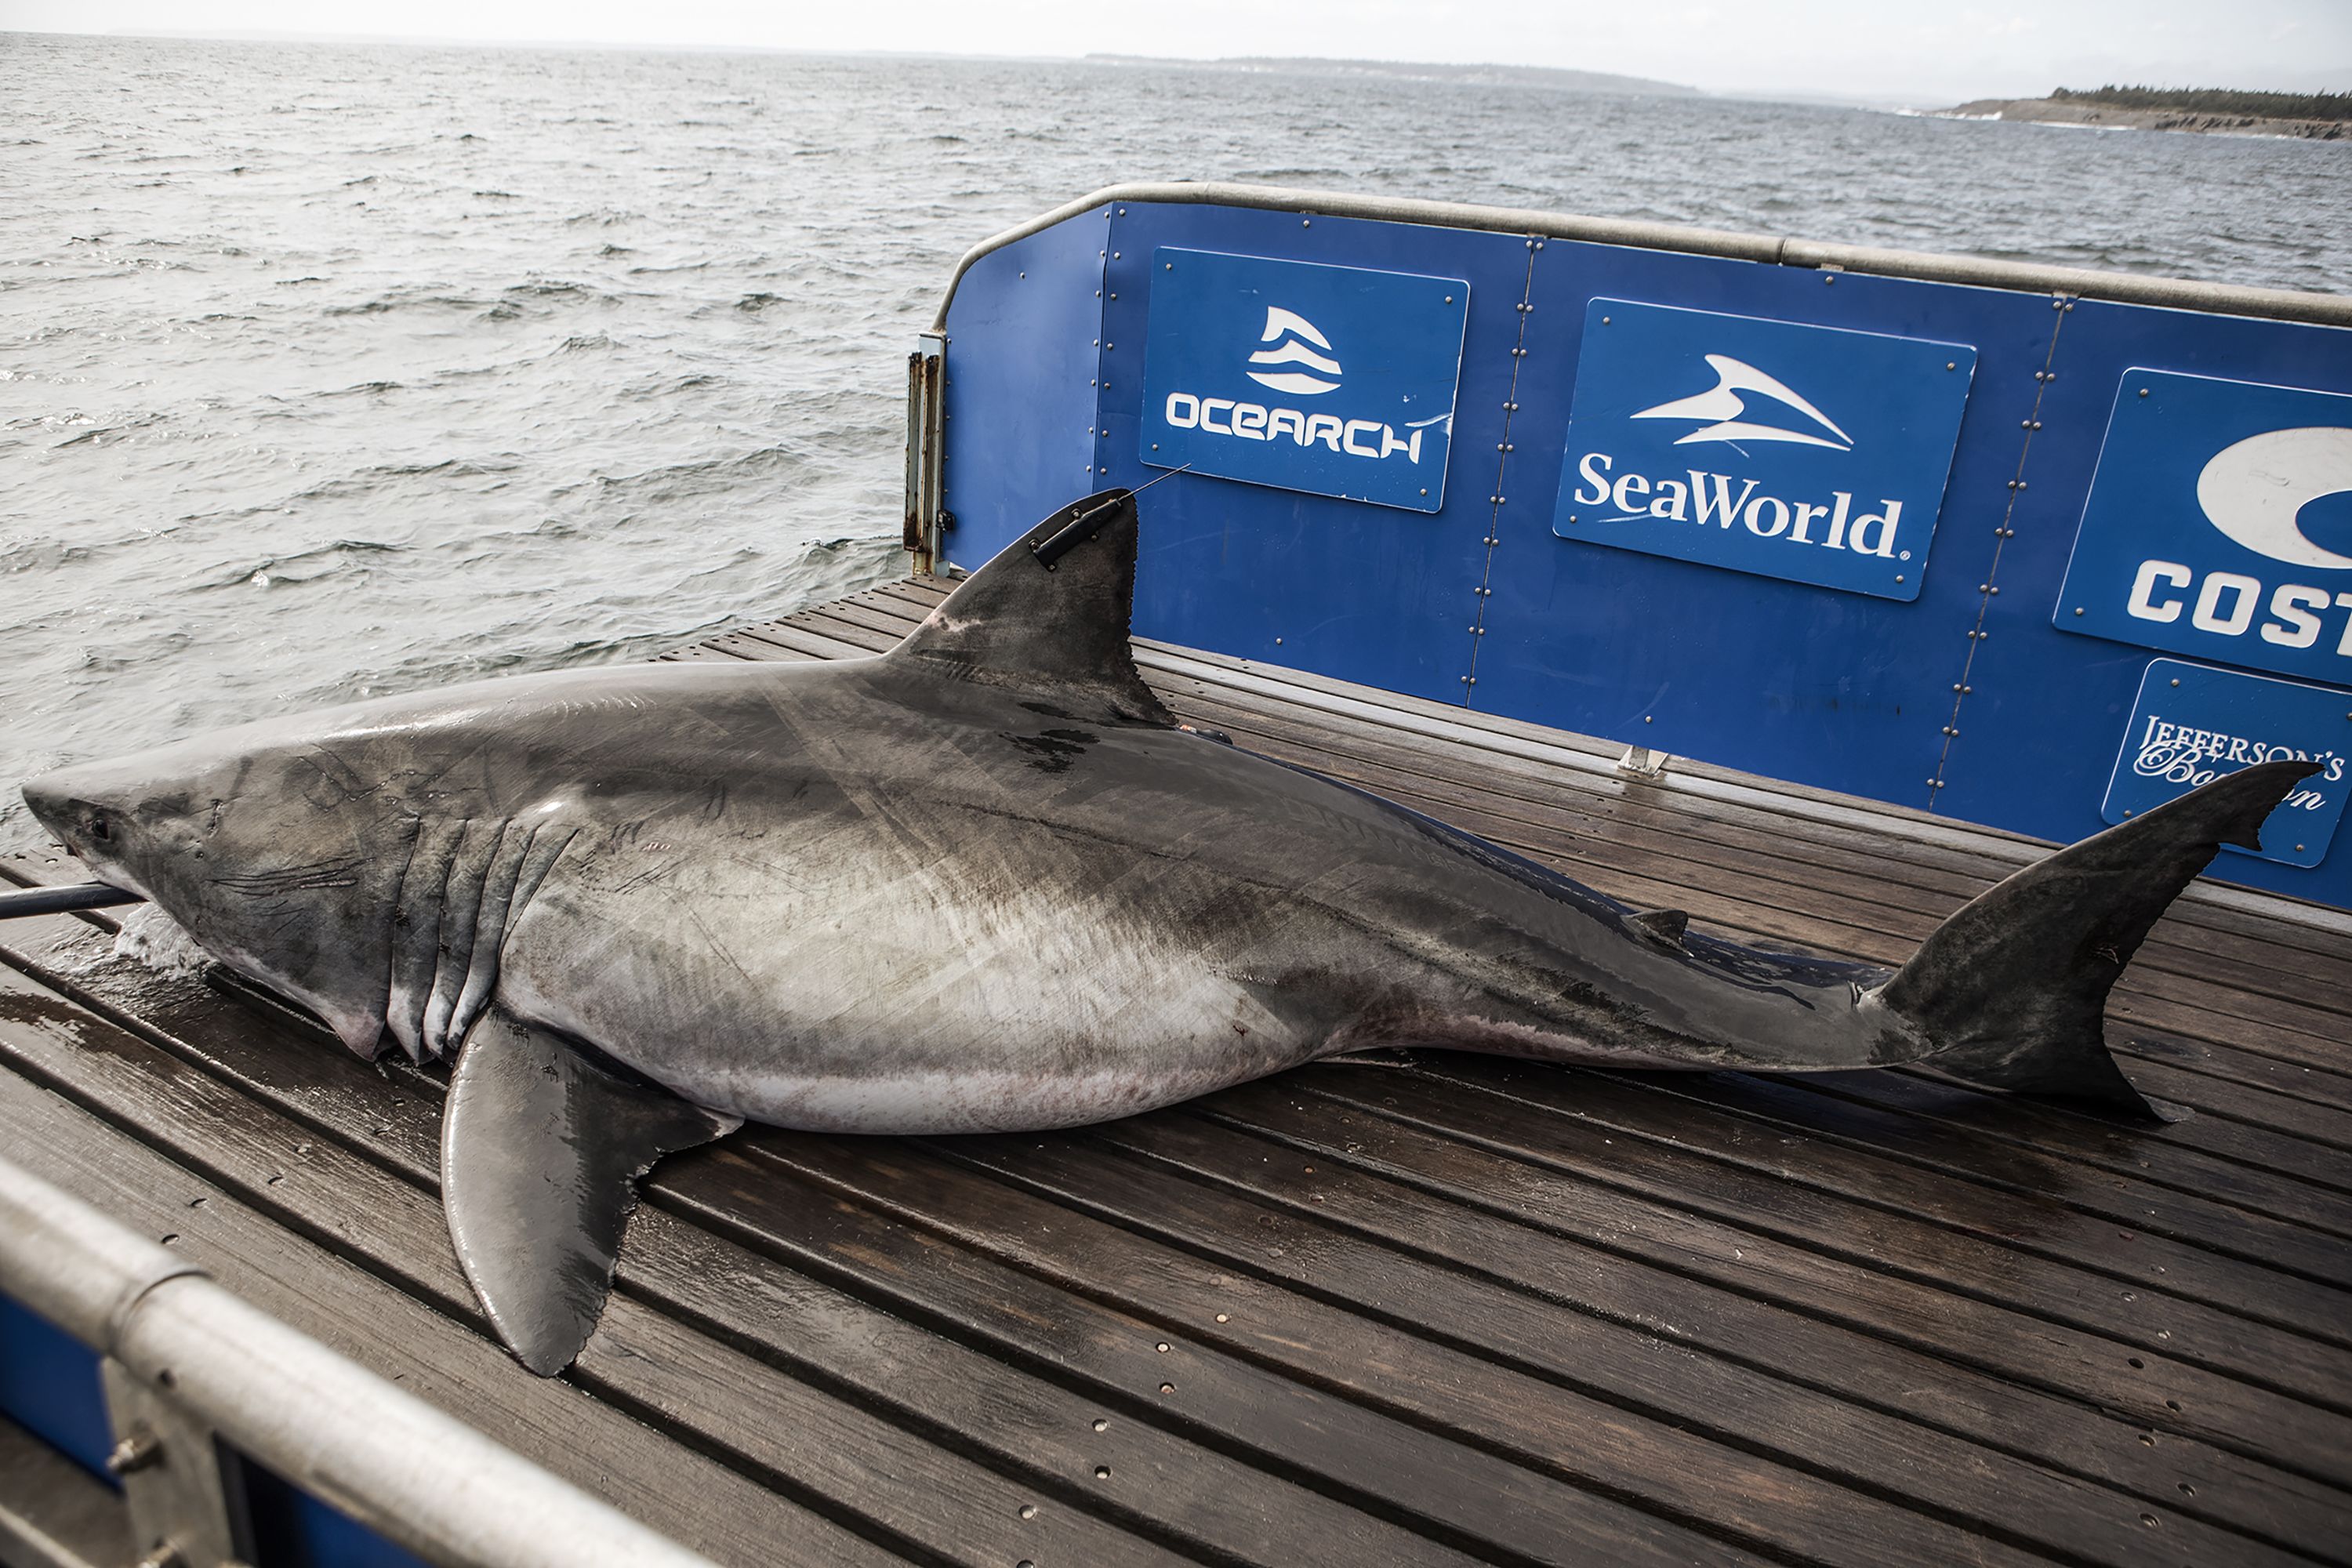 1,200-pound great white shark is swimming off the coast of South Carolina